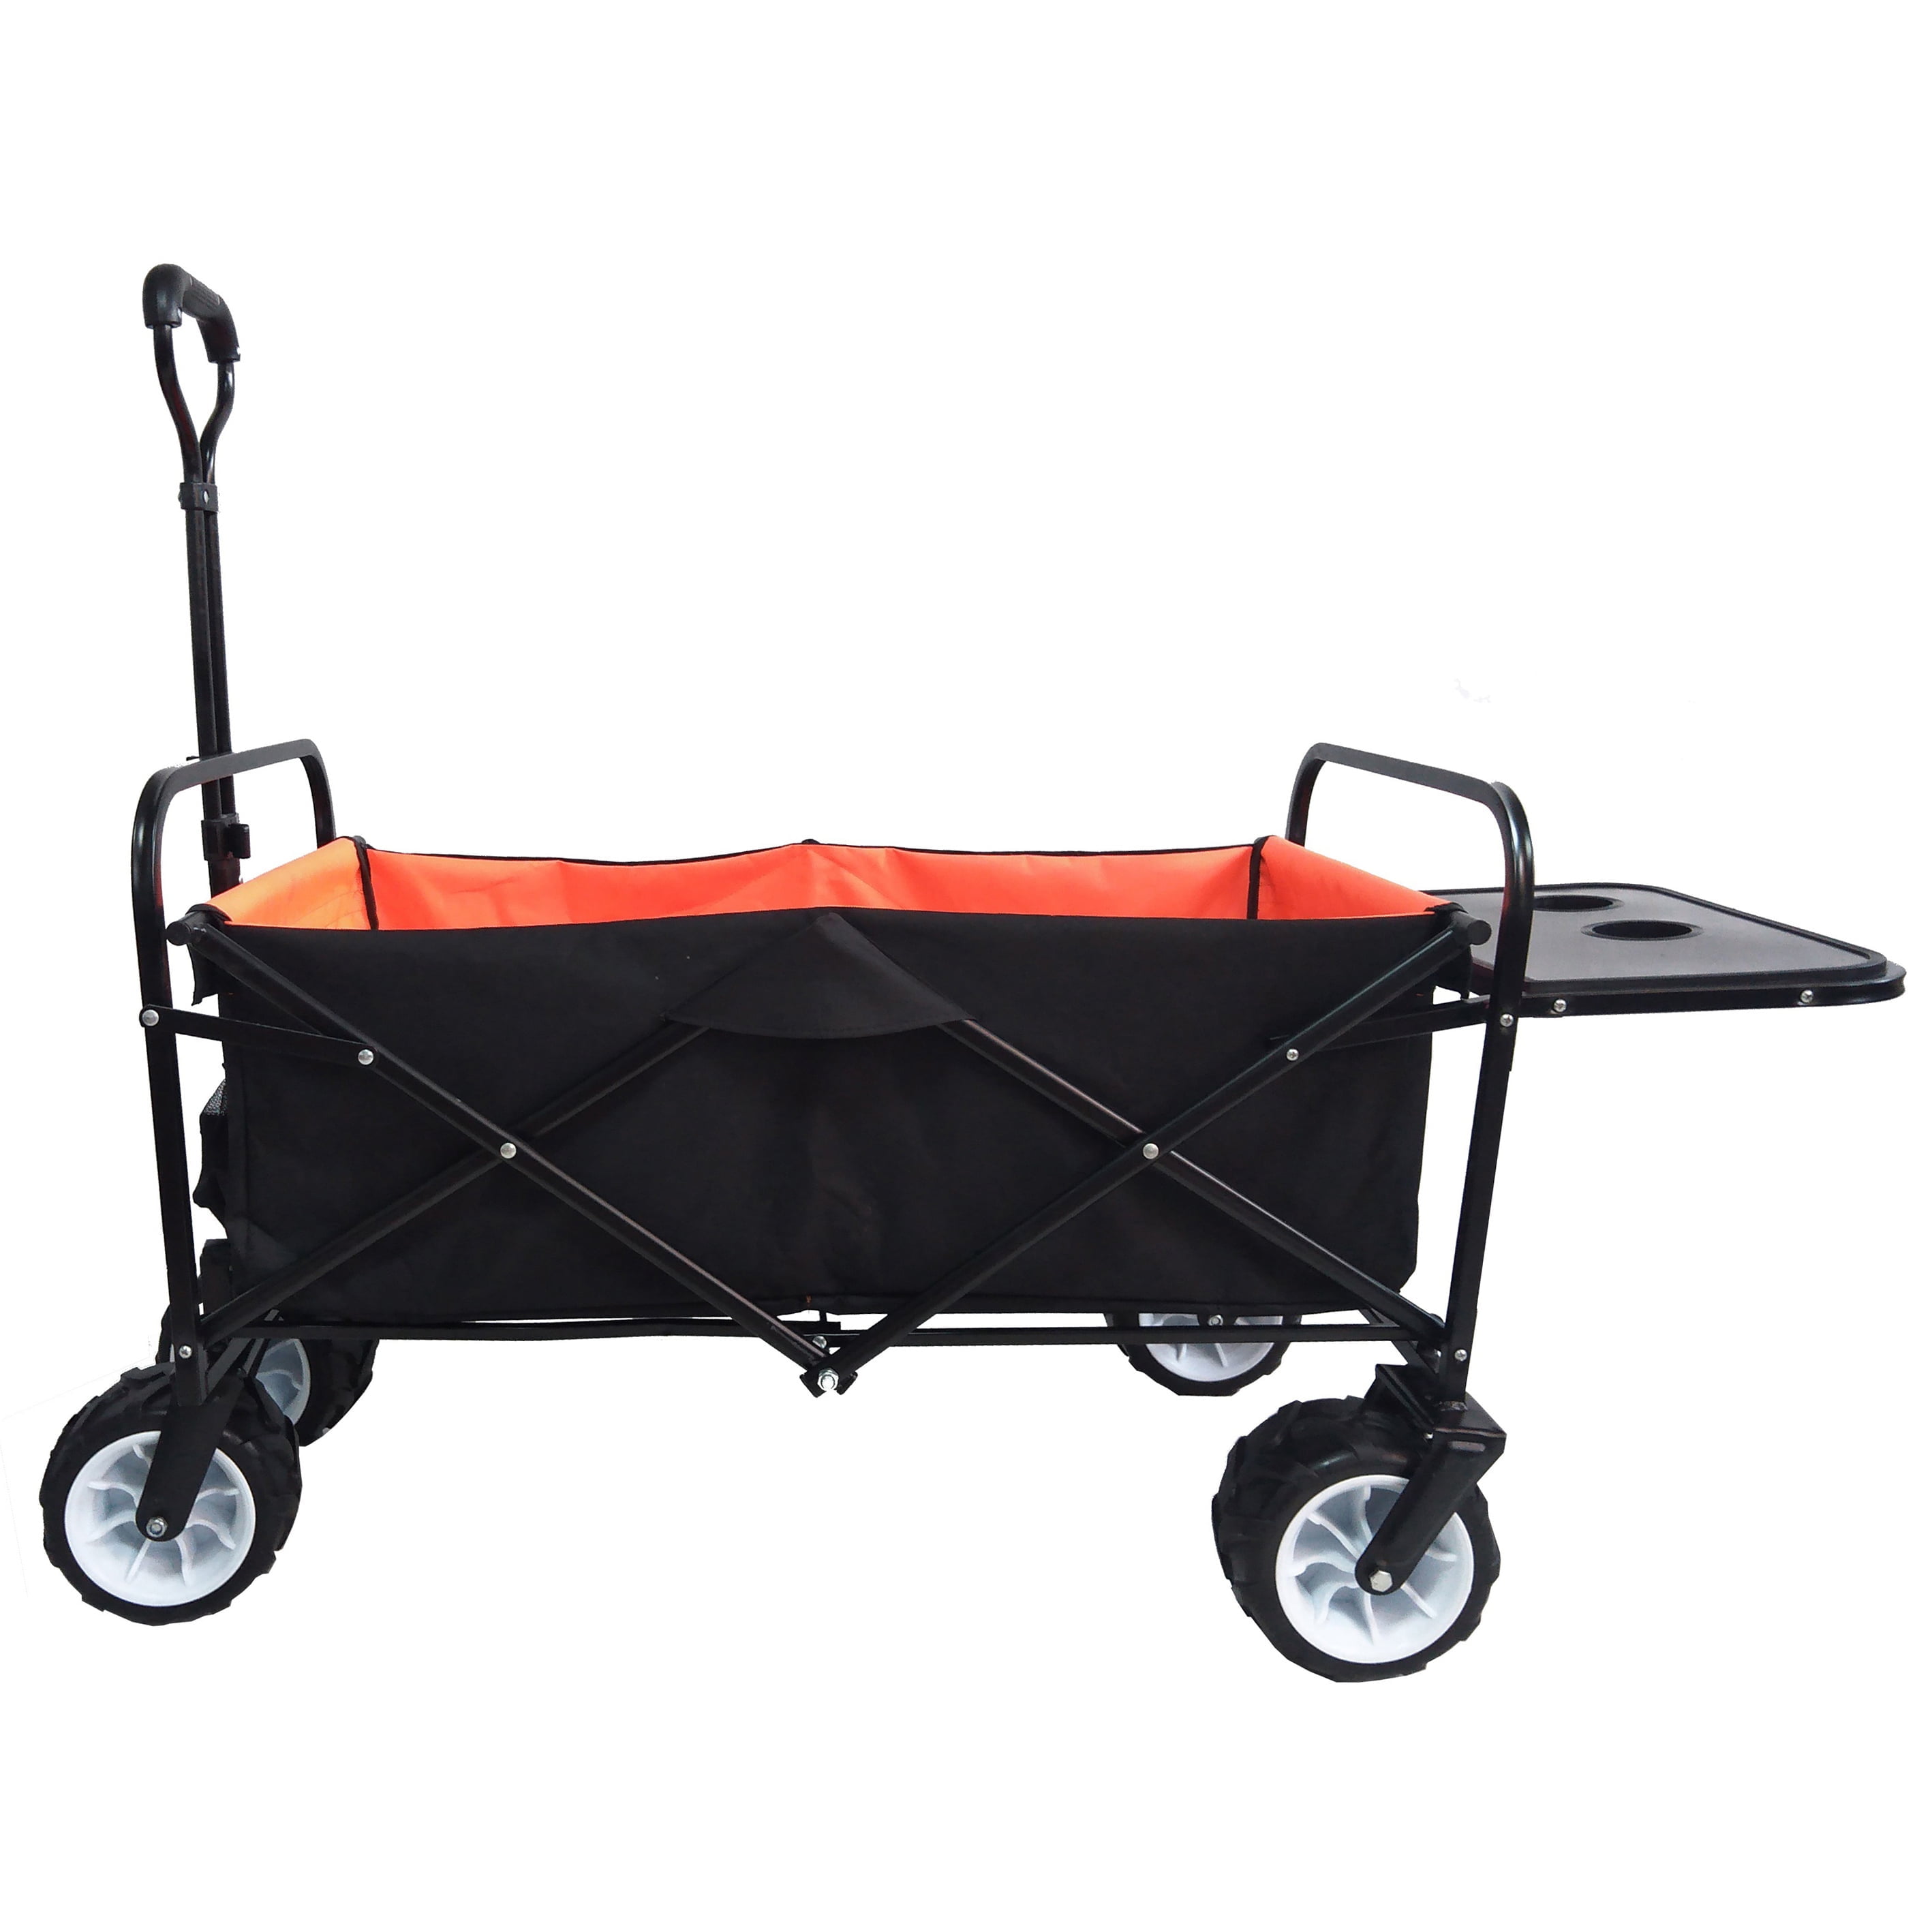 OFLAN Collapsible Wagon, Wagons Carts Heavy Duty Foldable with Push Bar, 2 Mesh Cup Holders & Drink Holder, Beach Wagon with Big Wheels for Sand, Wagons for Kids for Camping, Garden Utility Wagon